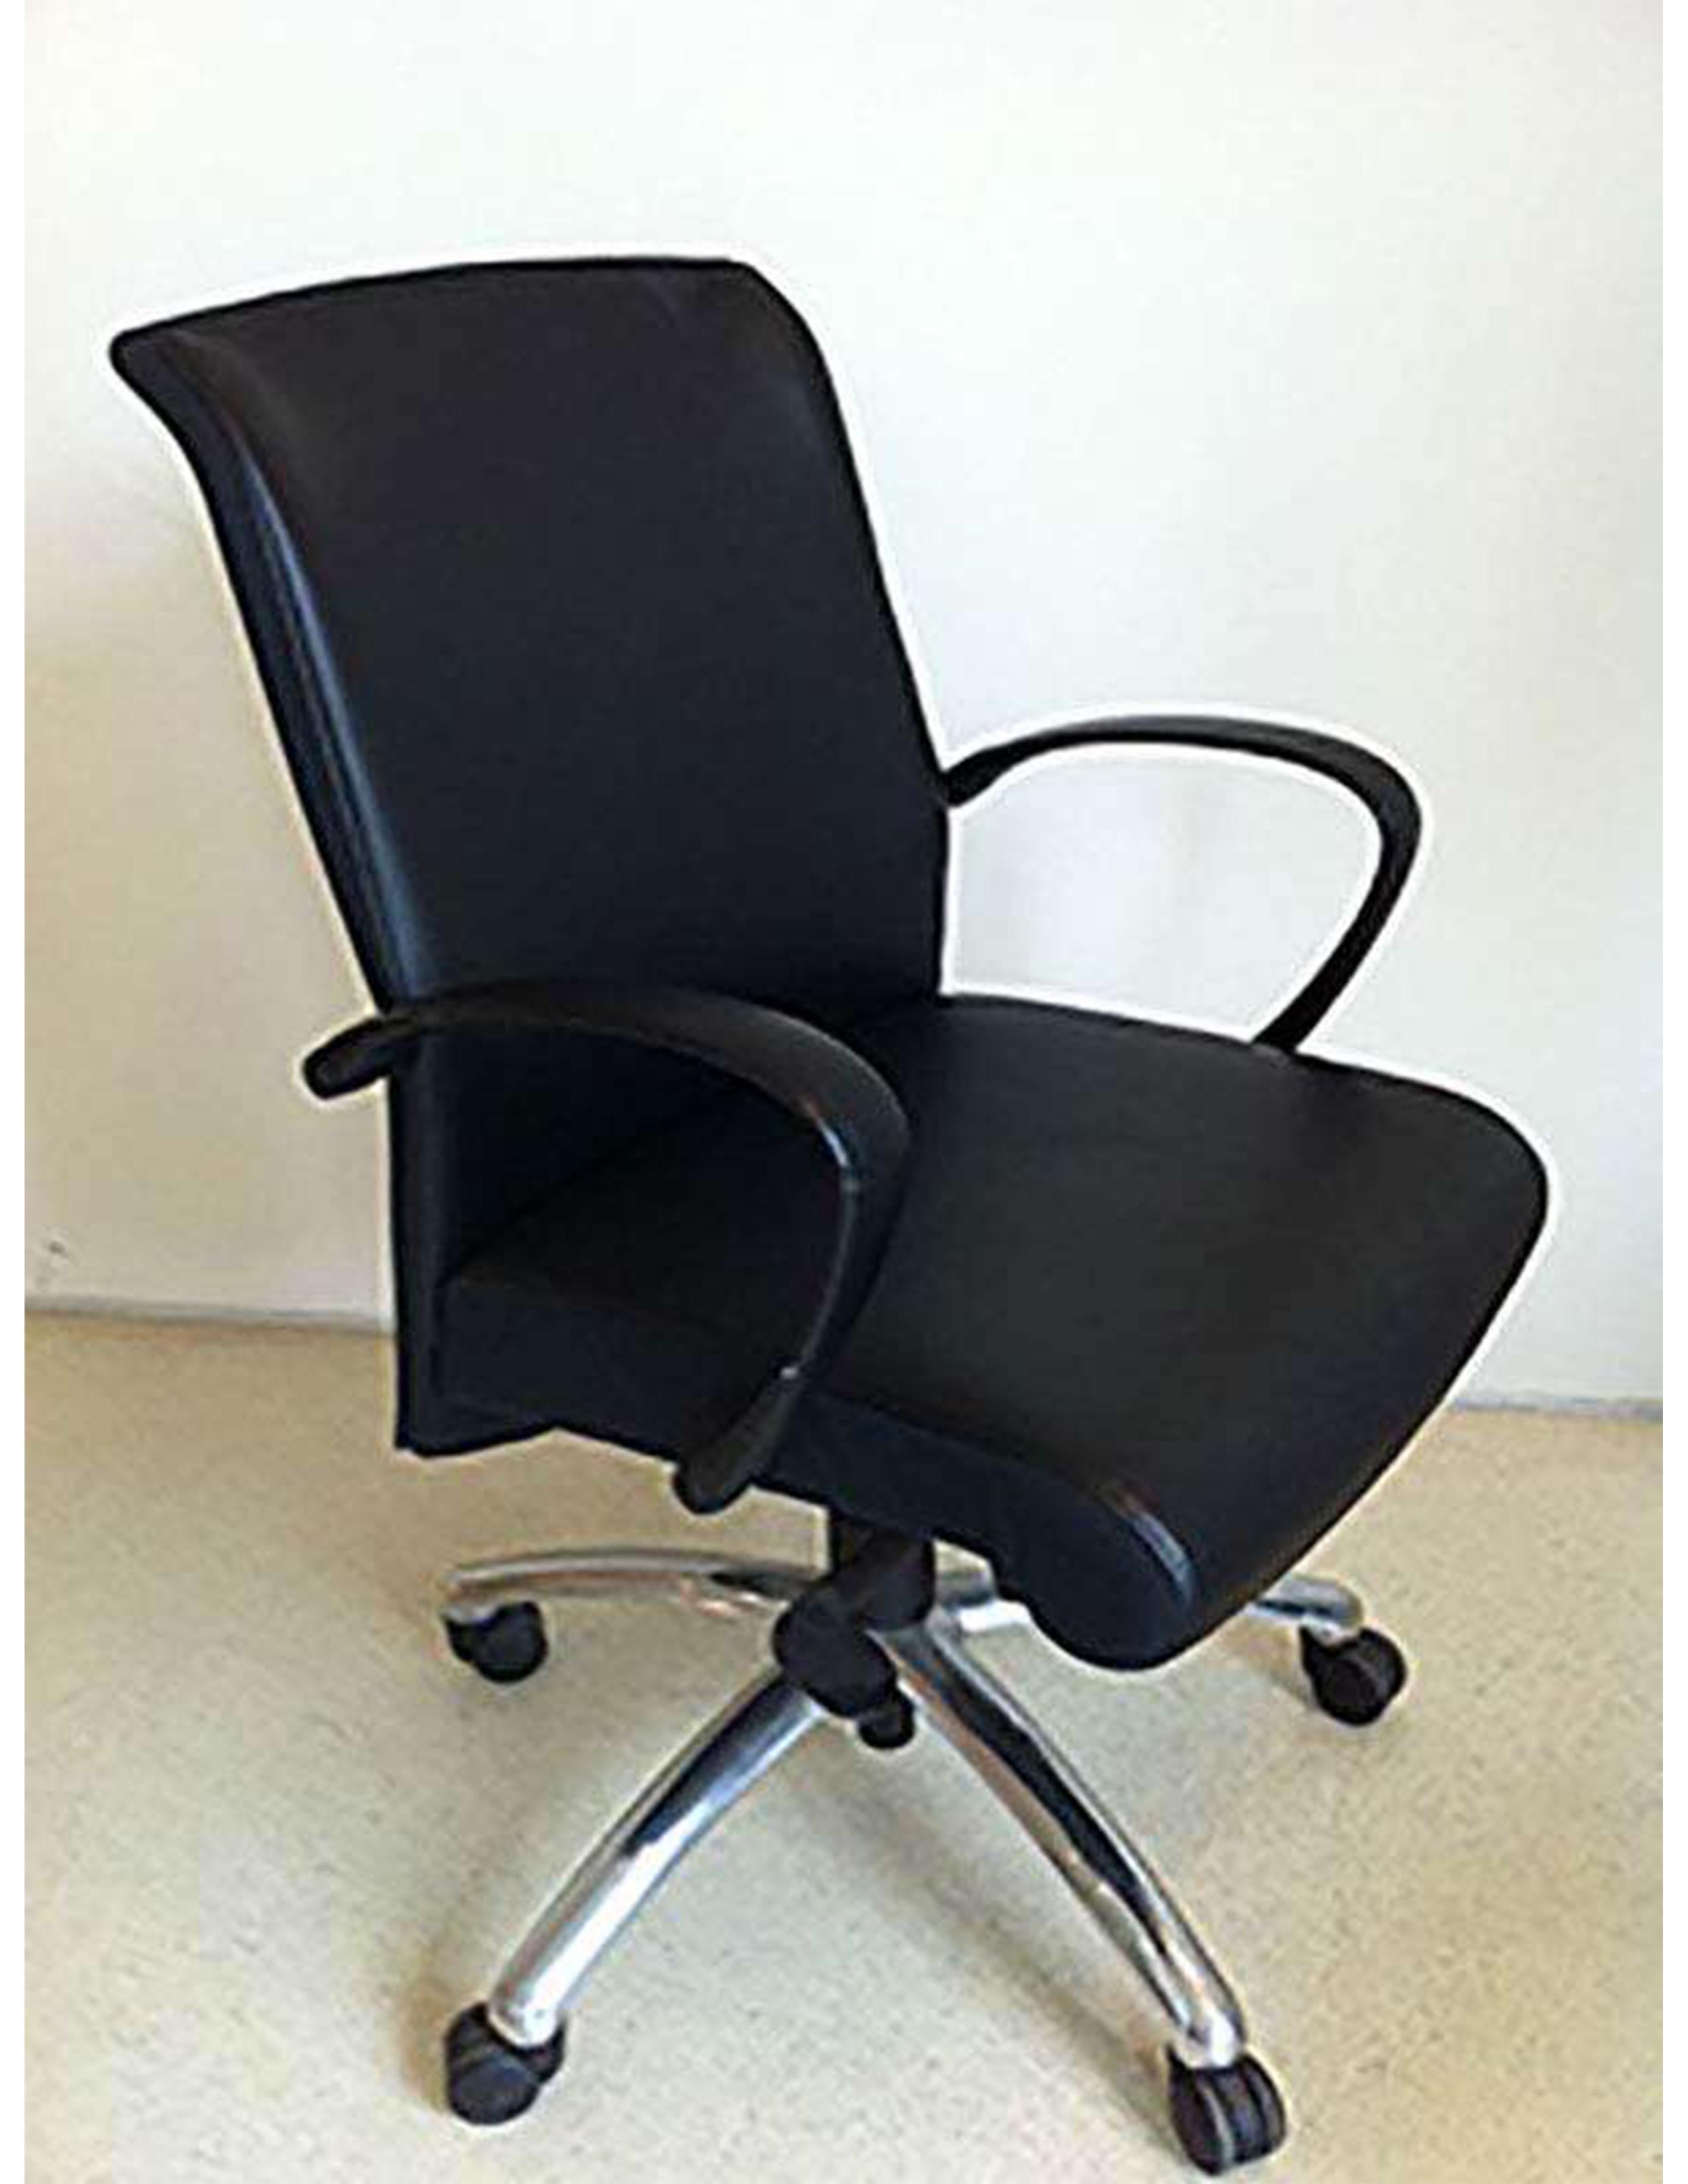 With its slender elegant design, Slim is also ideal for conference rooms and guest seating.
Height adjustable back provides back and neck support at desired location.
Black leather, on castors
Original price: $1200
Measures: Height 37-41 